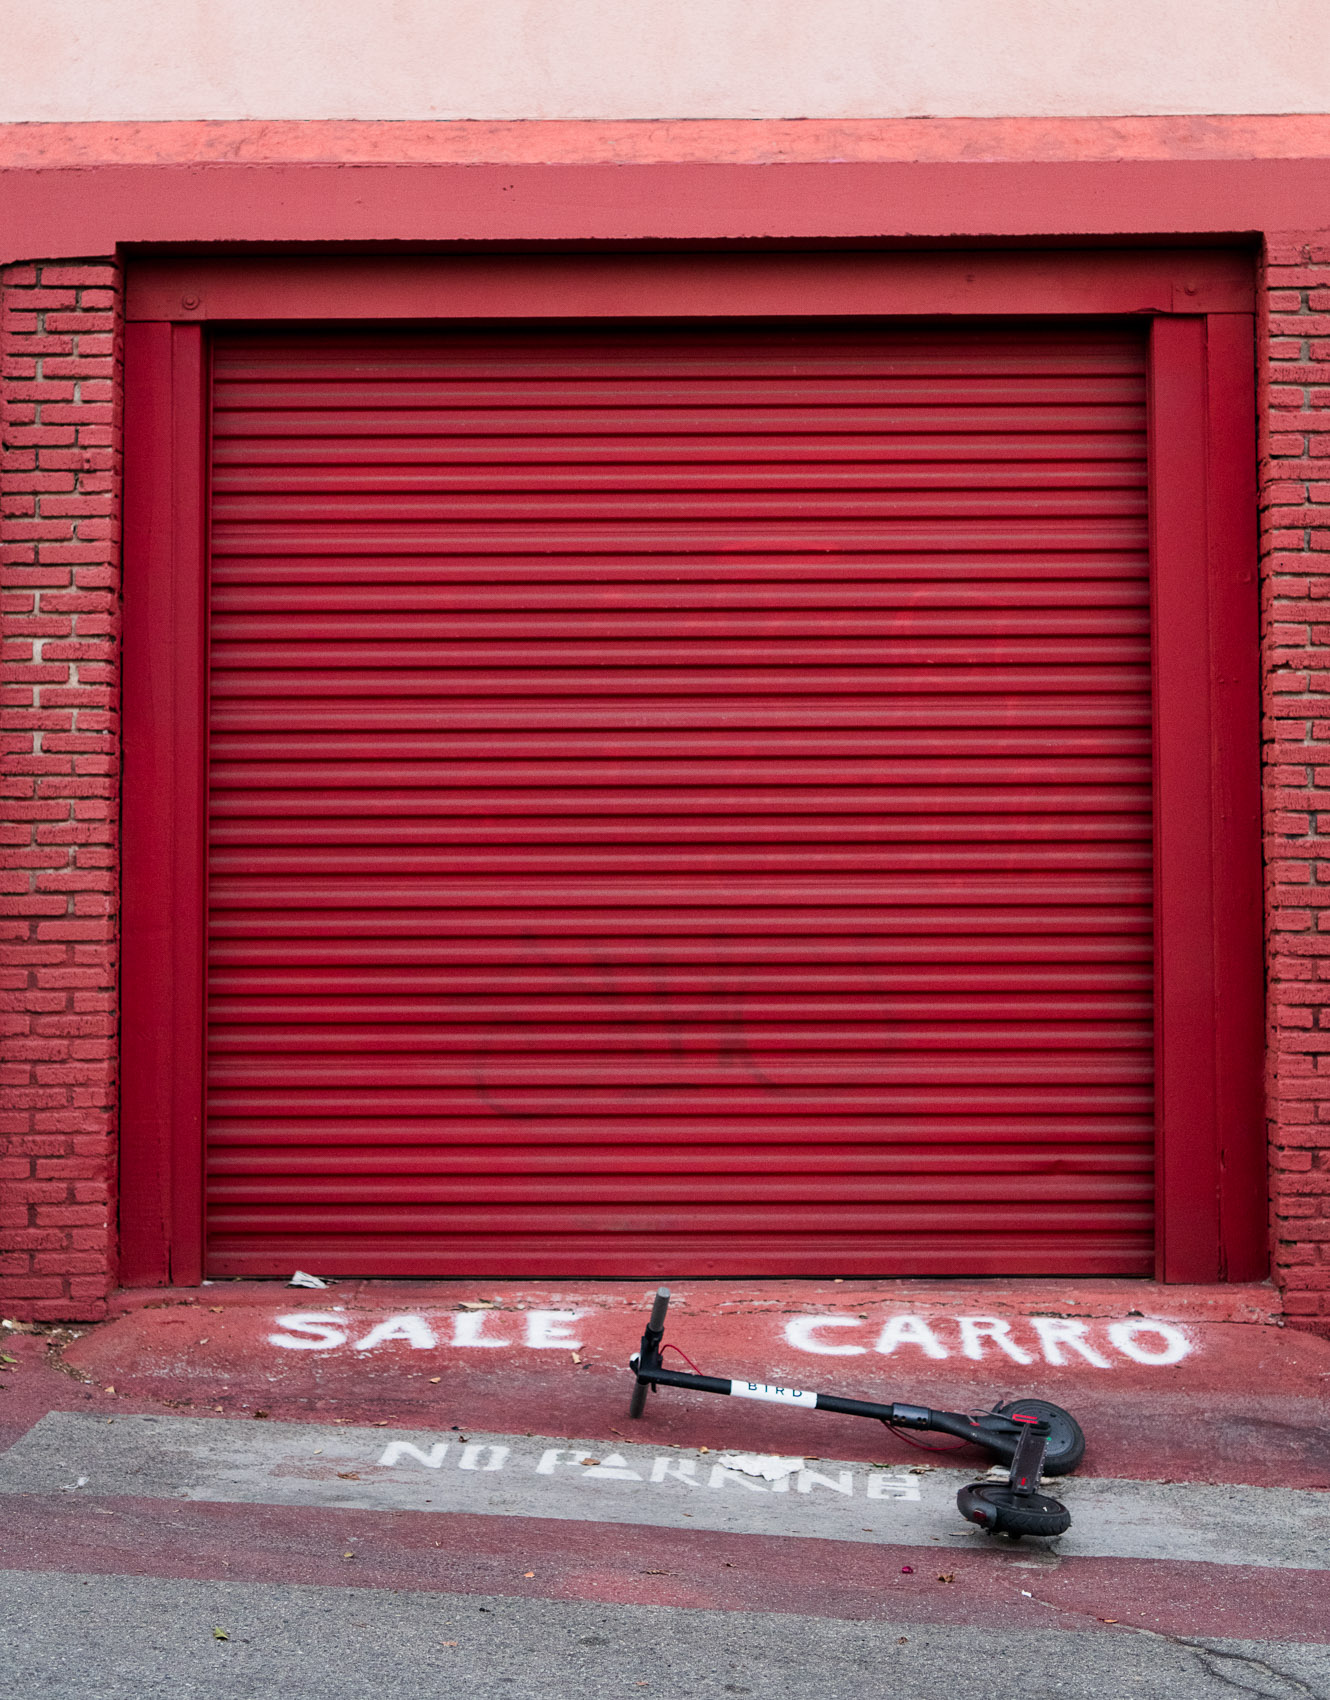 A Bird scooter lies in front of a red garage with a no parking sign in a Venice Beach alley.